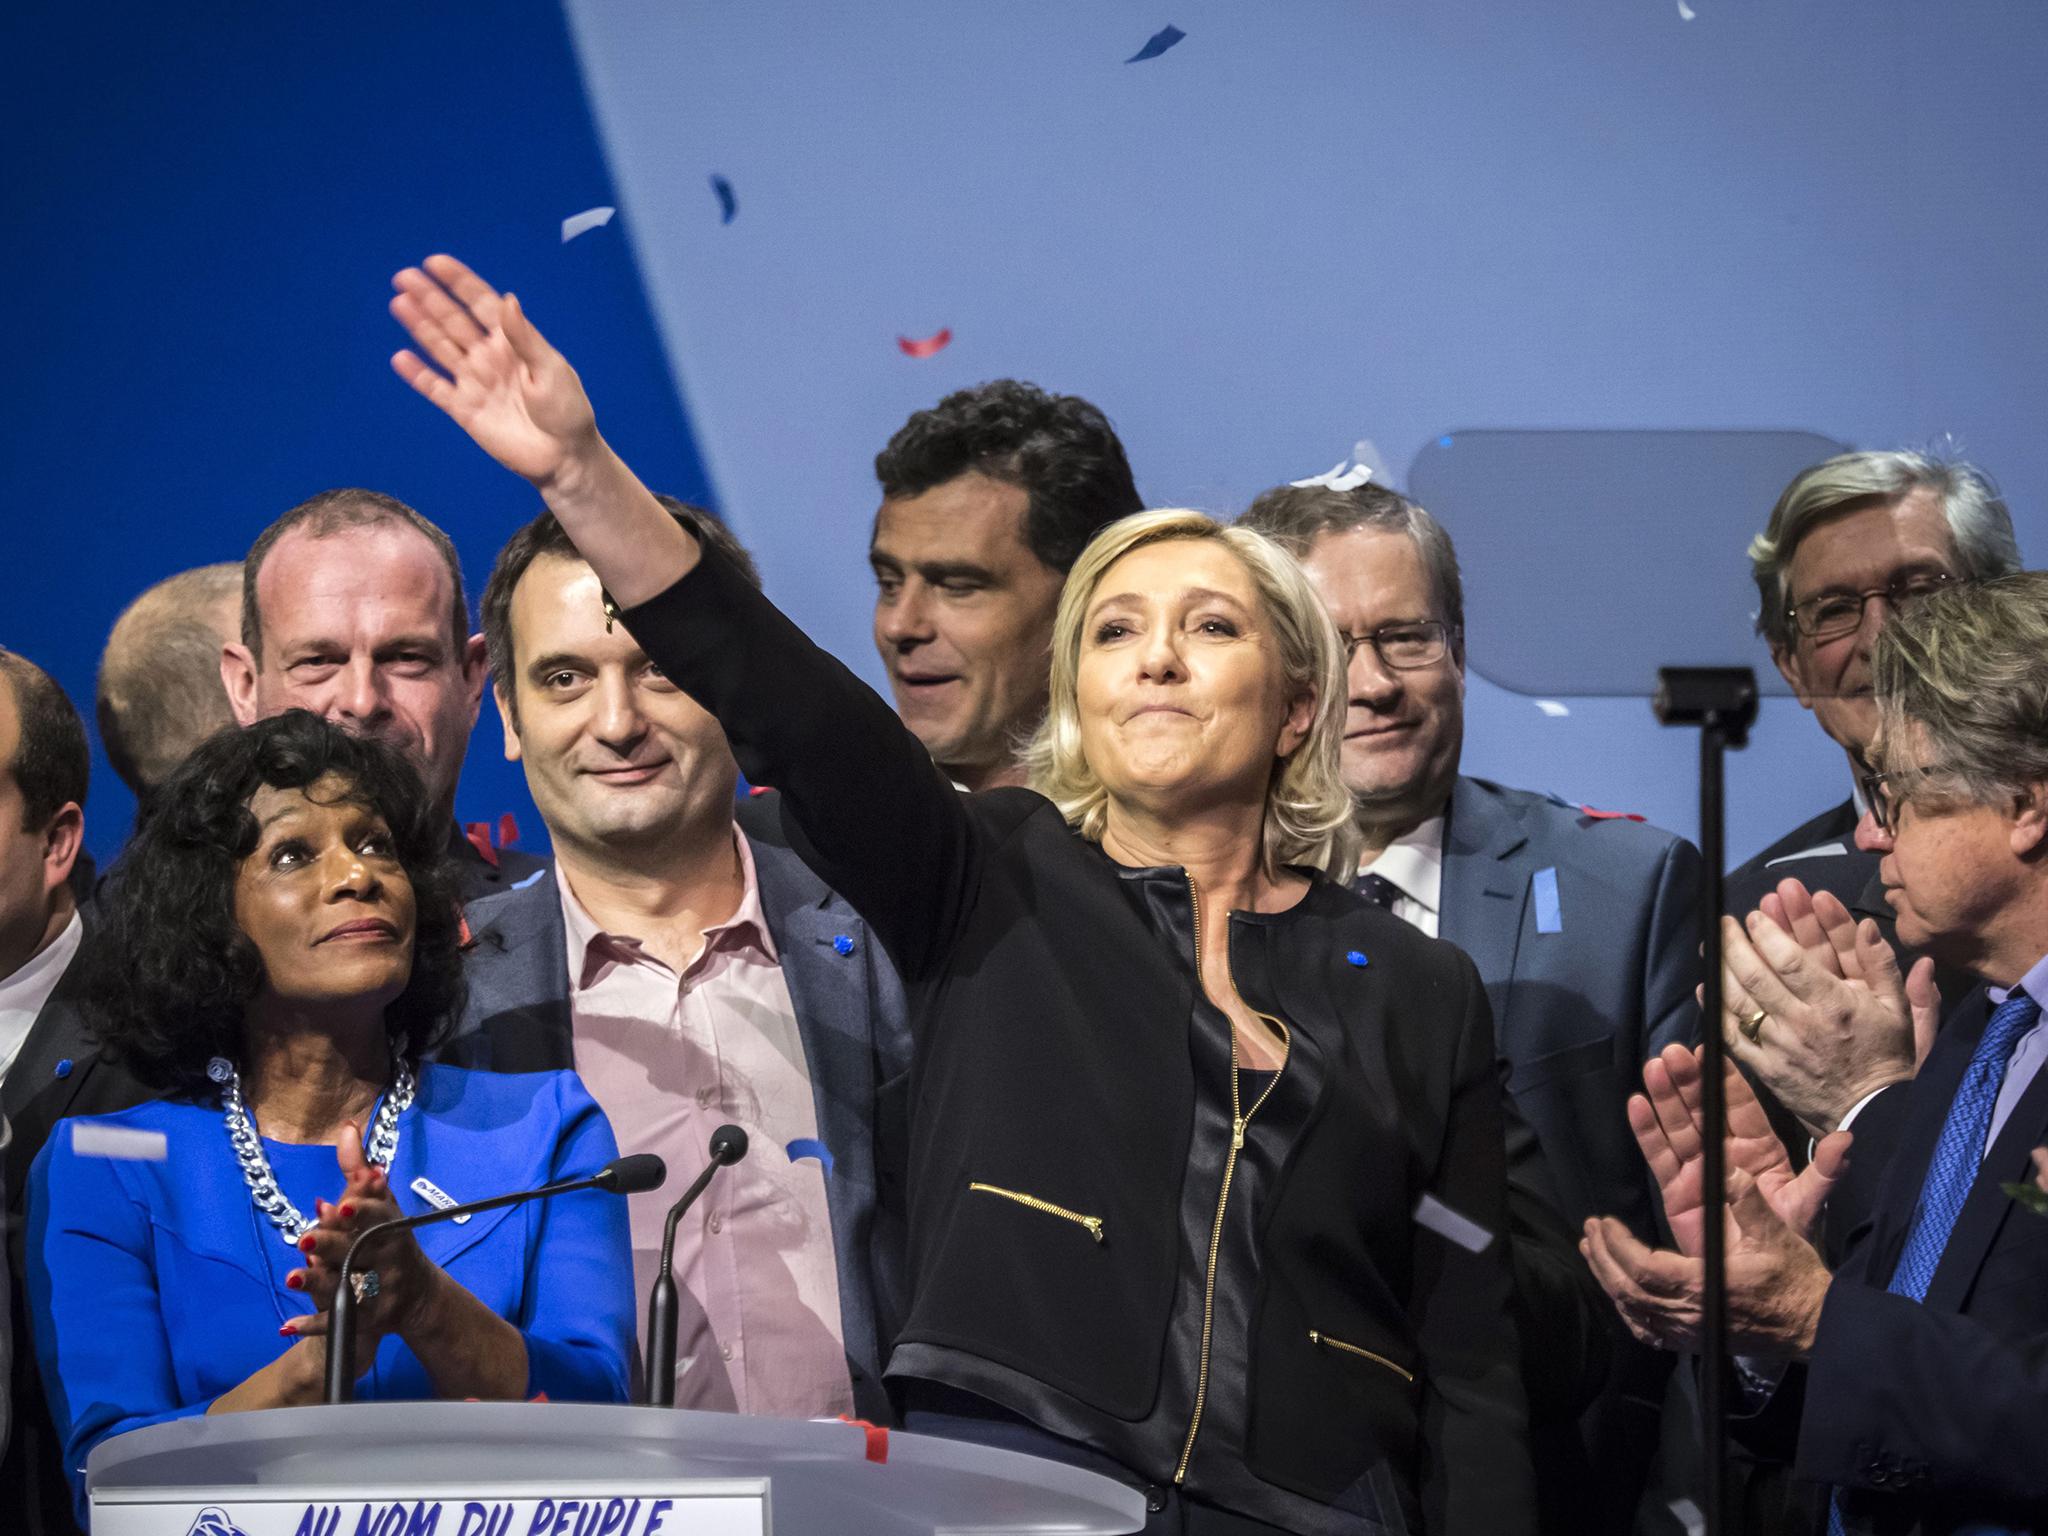 Le Pen delivers a speech during a Front National rally in Lyon, the first event of her presidential campaign